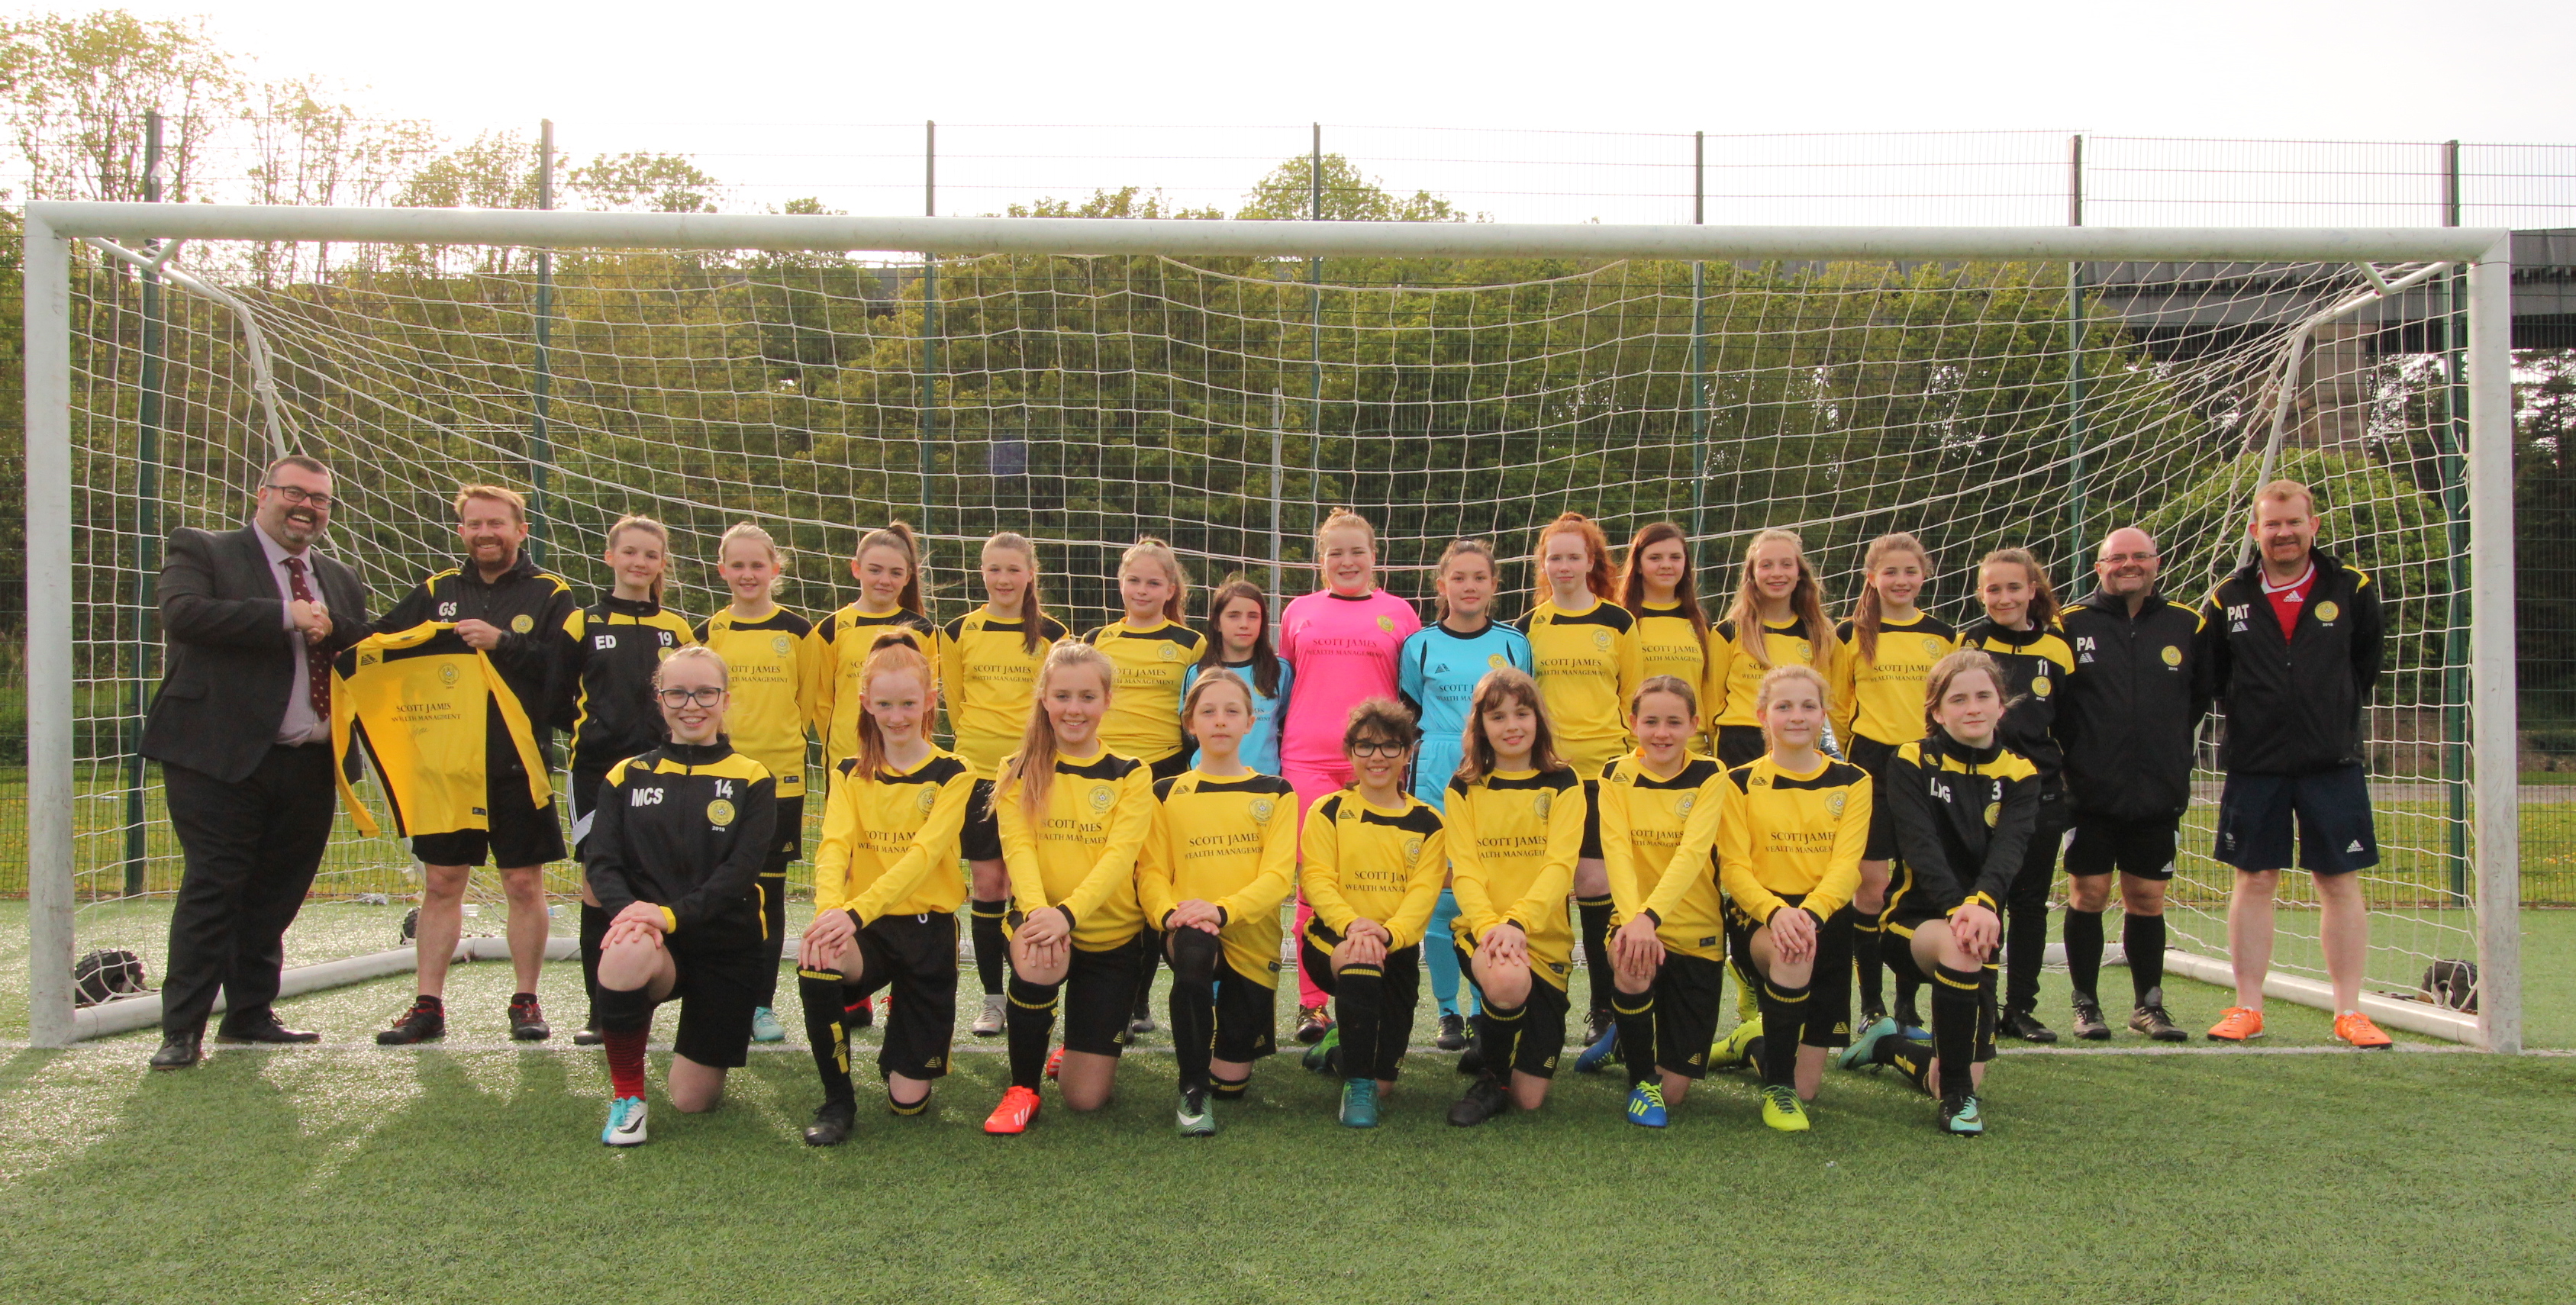 Scott James Wealth Management supports Aberdeen youth football teams